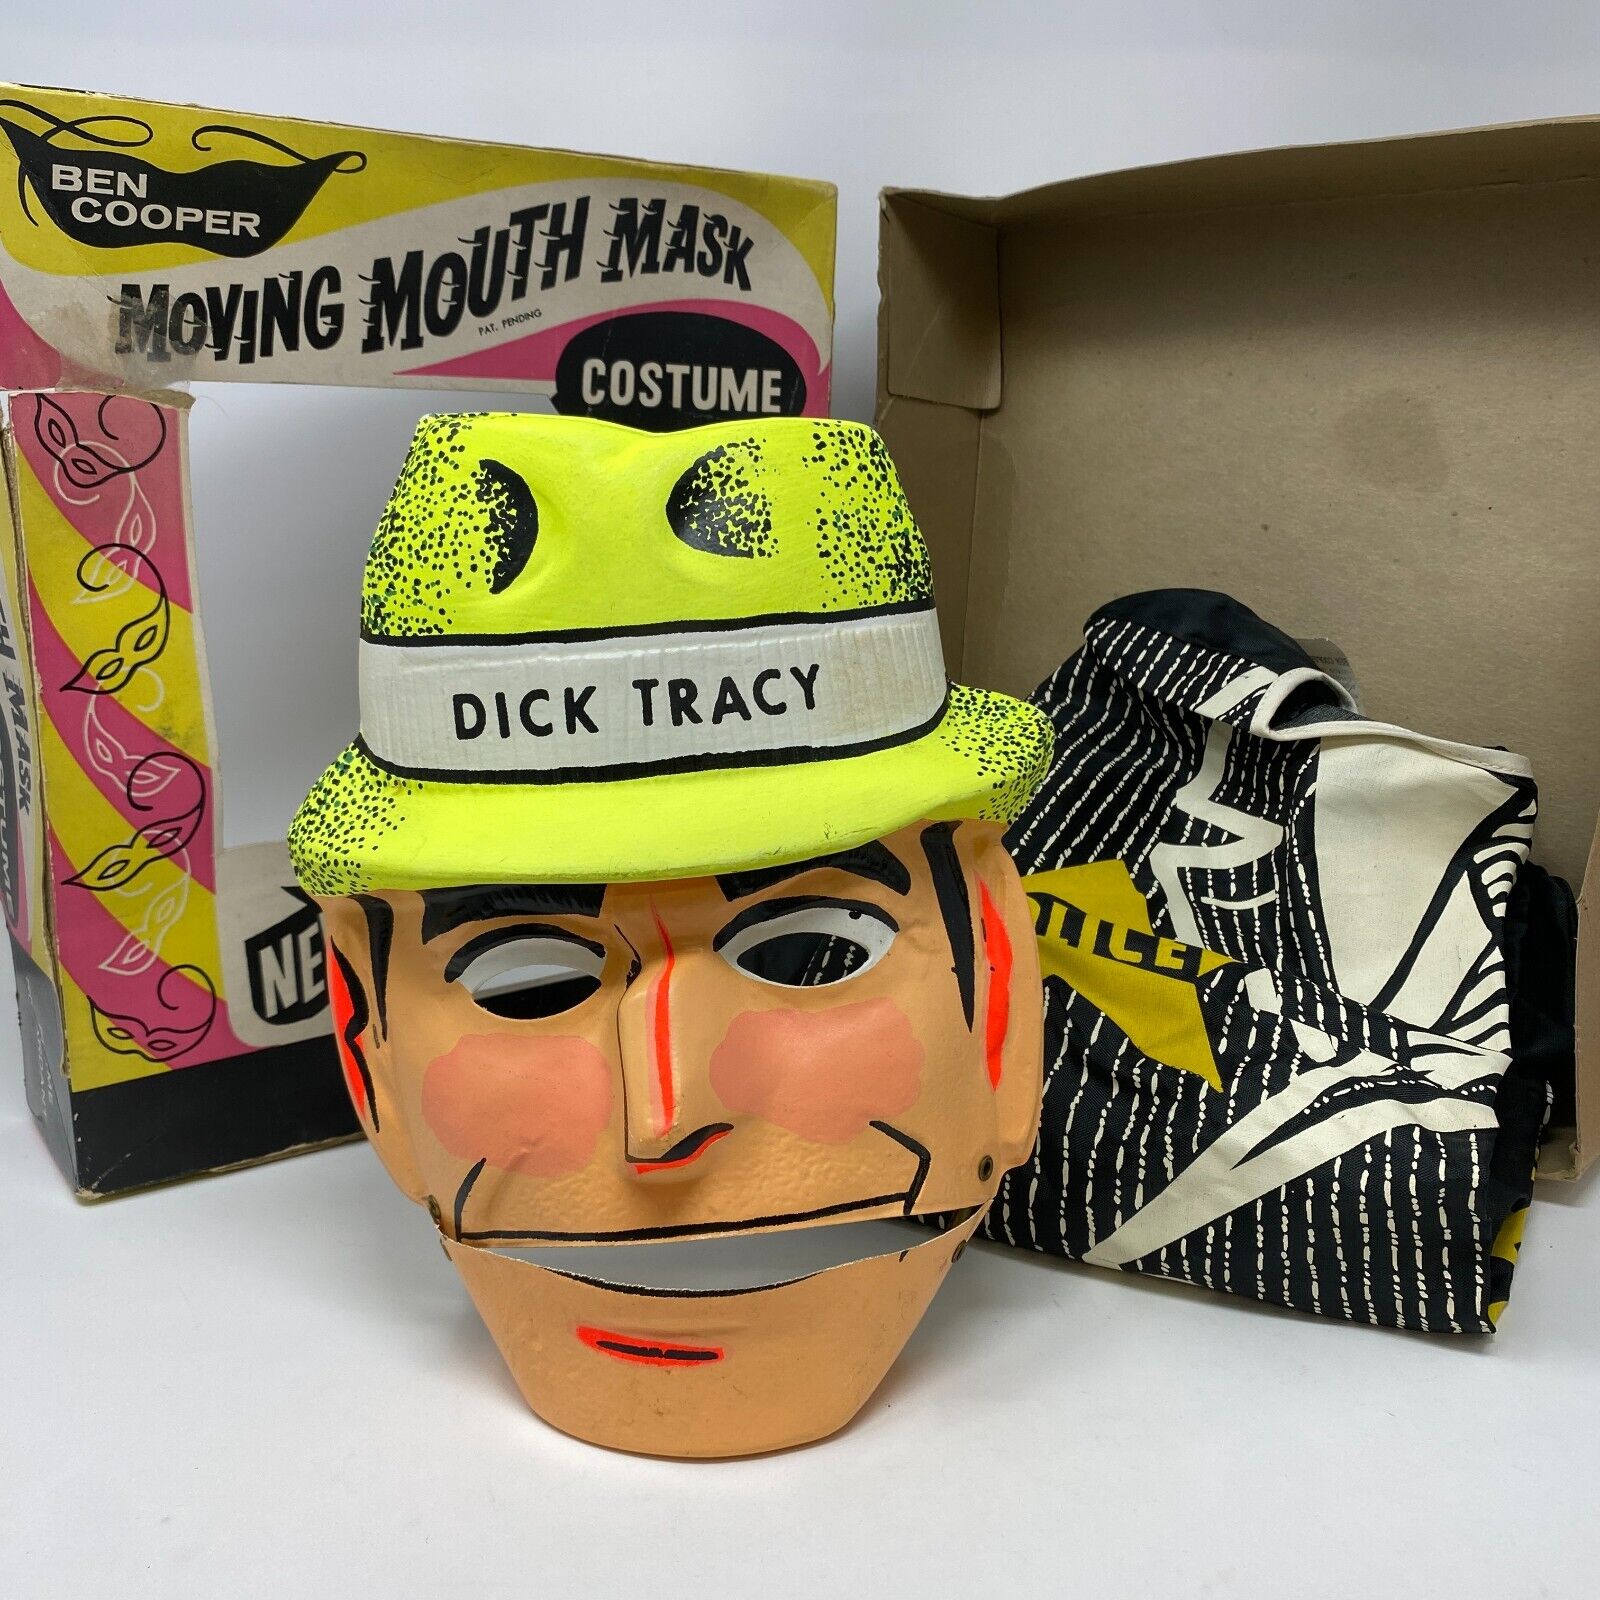 Ben Cooper DICK TRACY Vintage Mask and Costume Moving Mouth Rare Some Wear